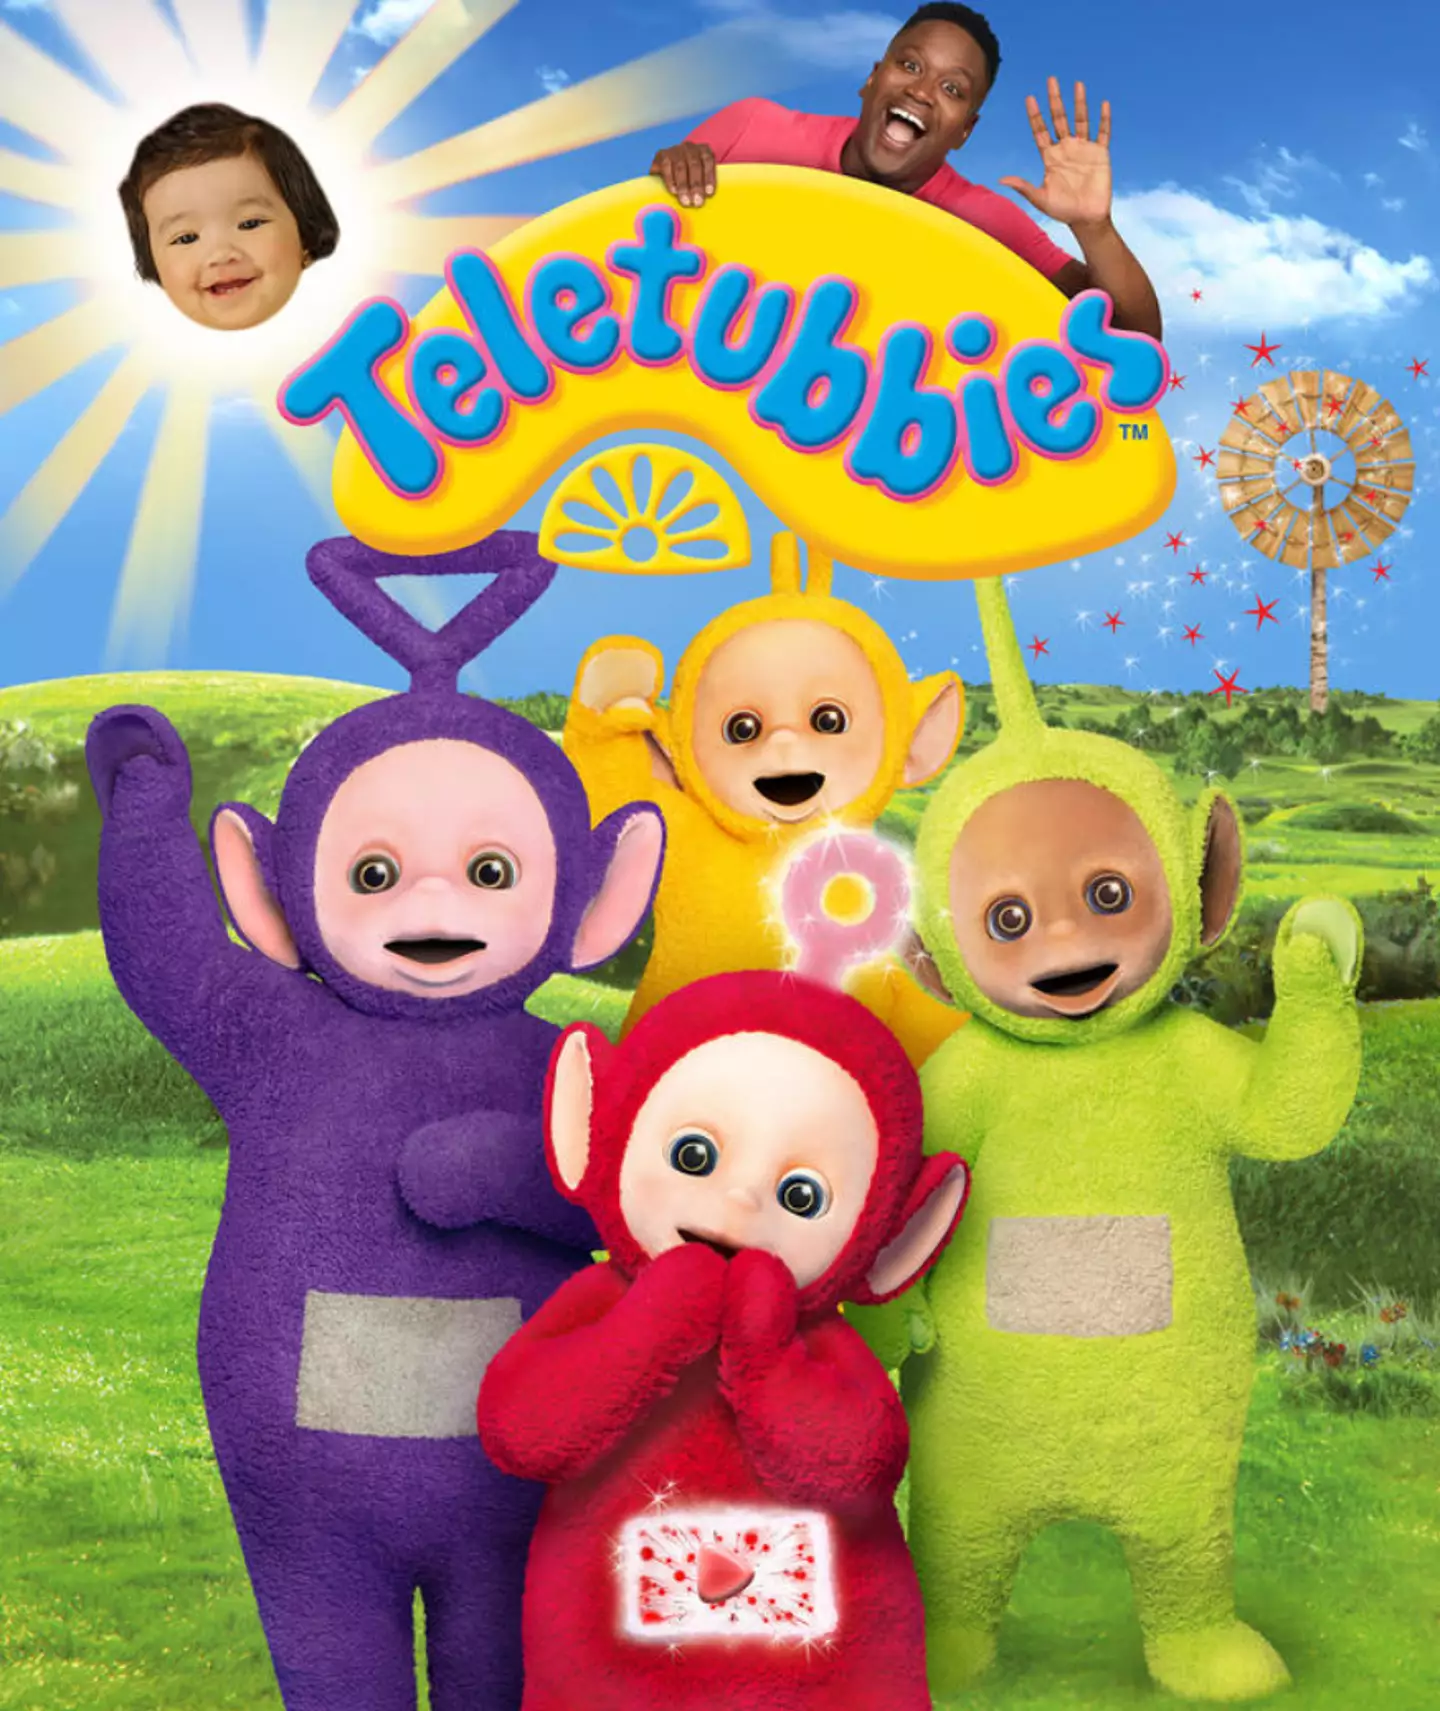 Teletubbies is coming back.